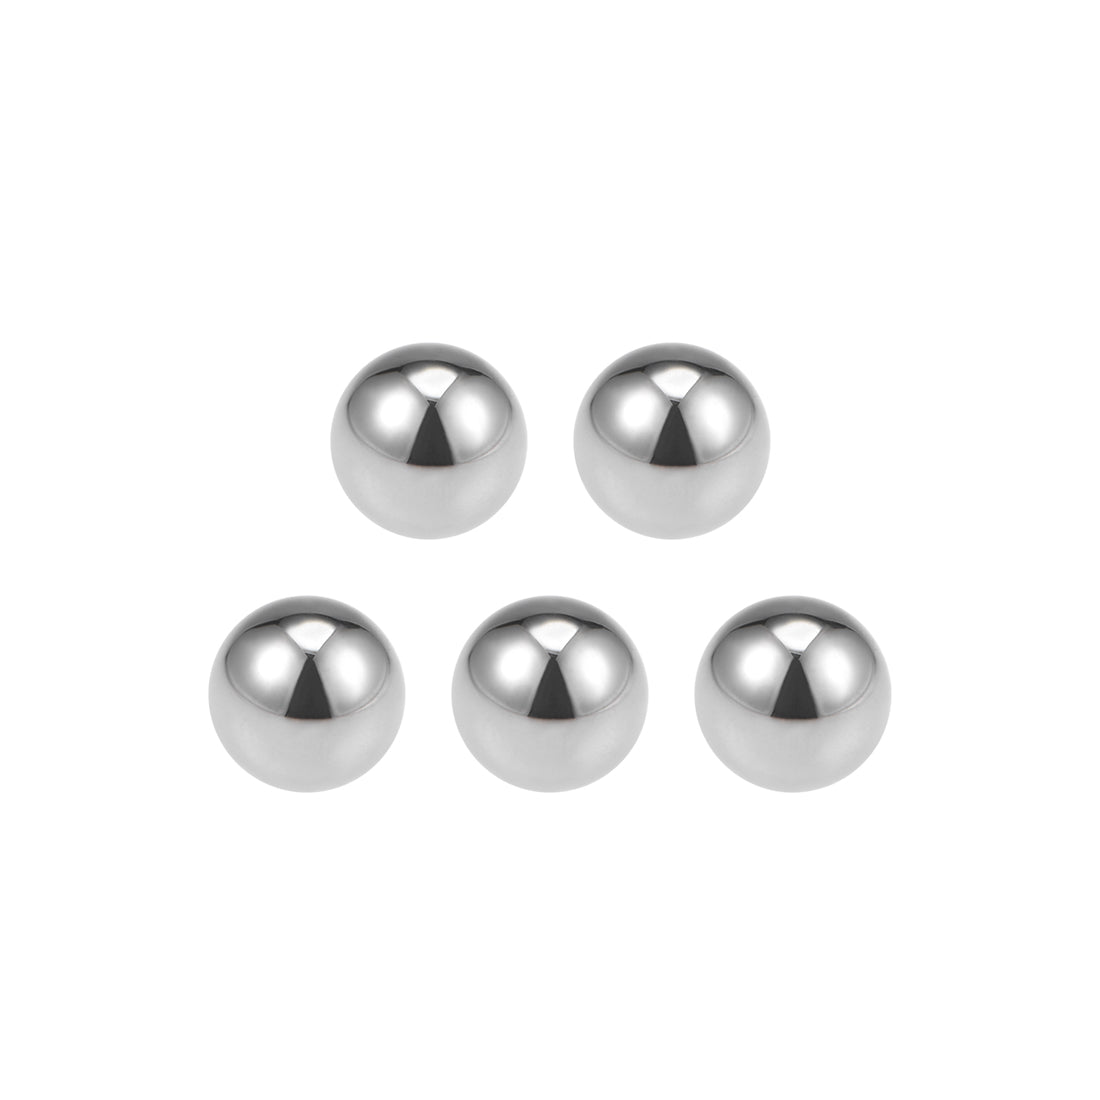 uxcell Uxcell Precision Balls 1/2" Solid Chrome Steel G10 for Ball Bearing Wheel 5pcs